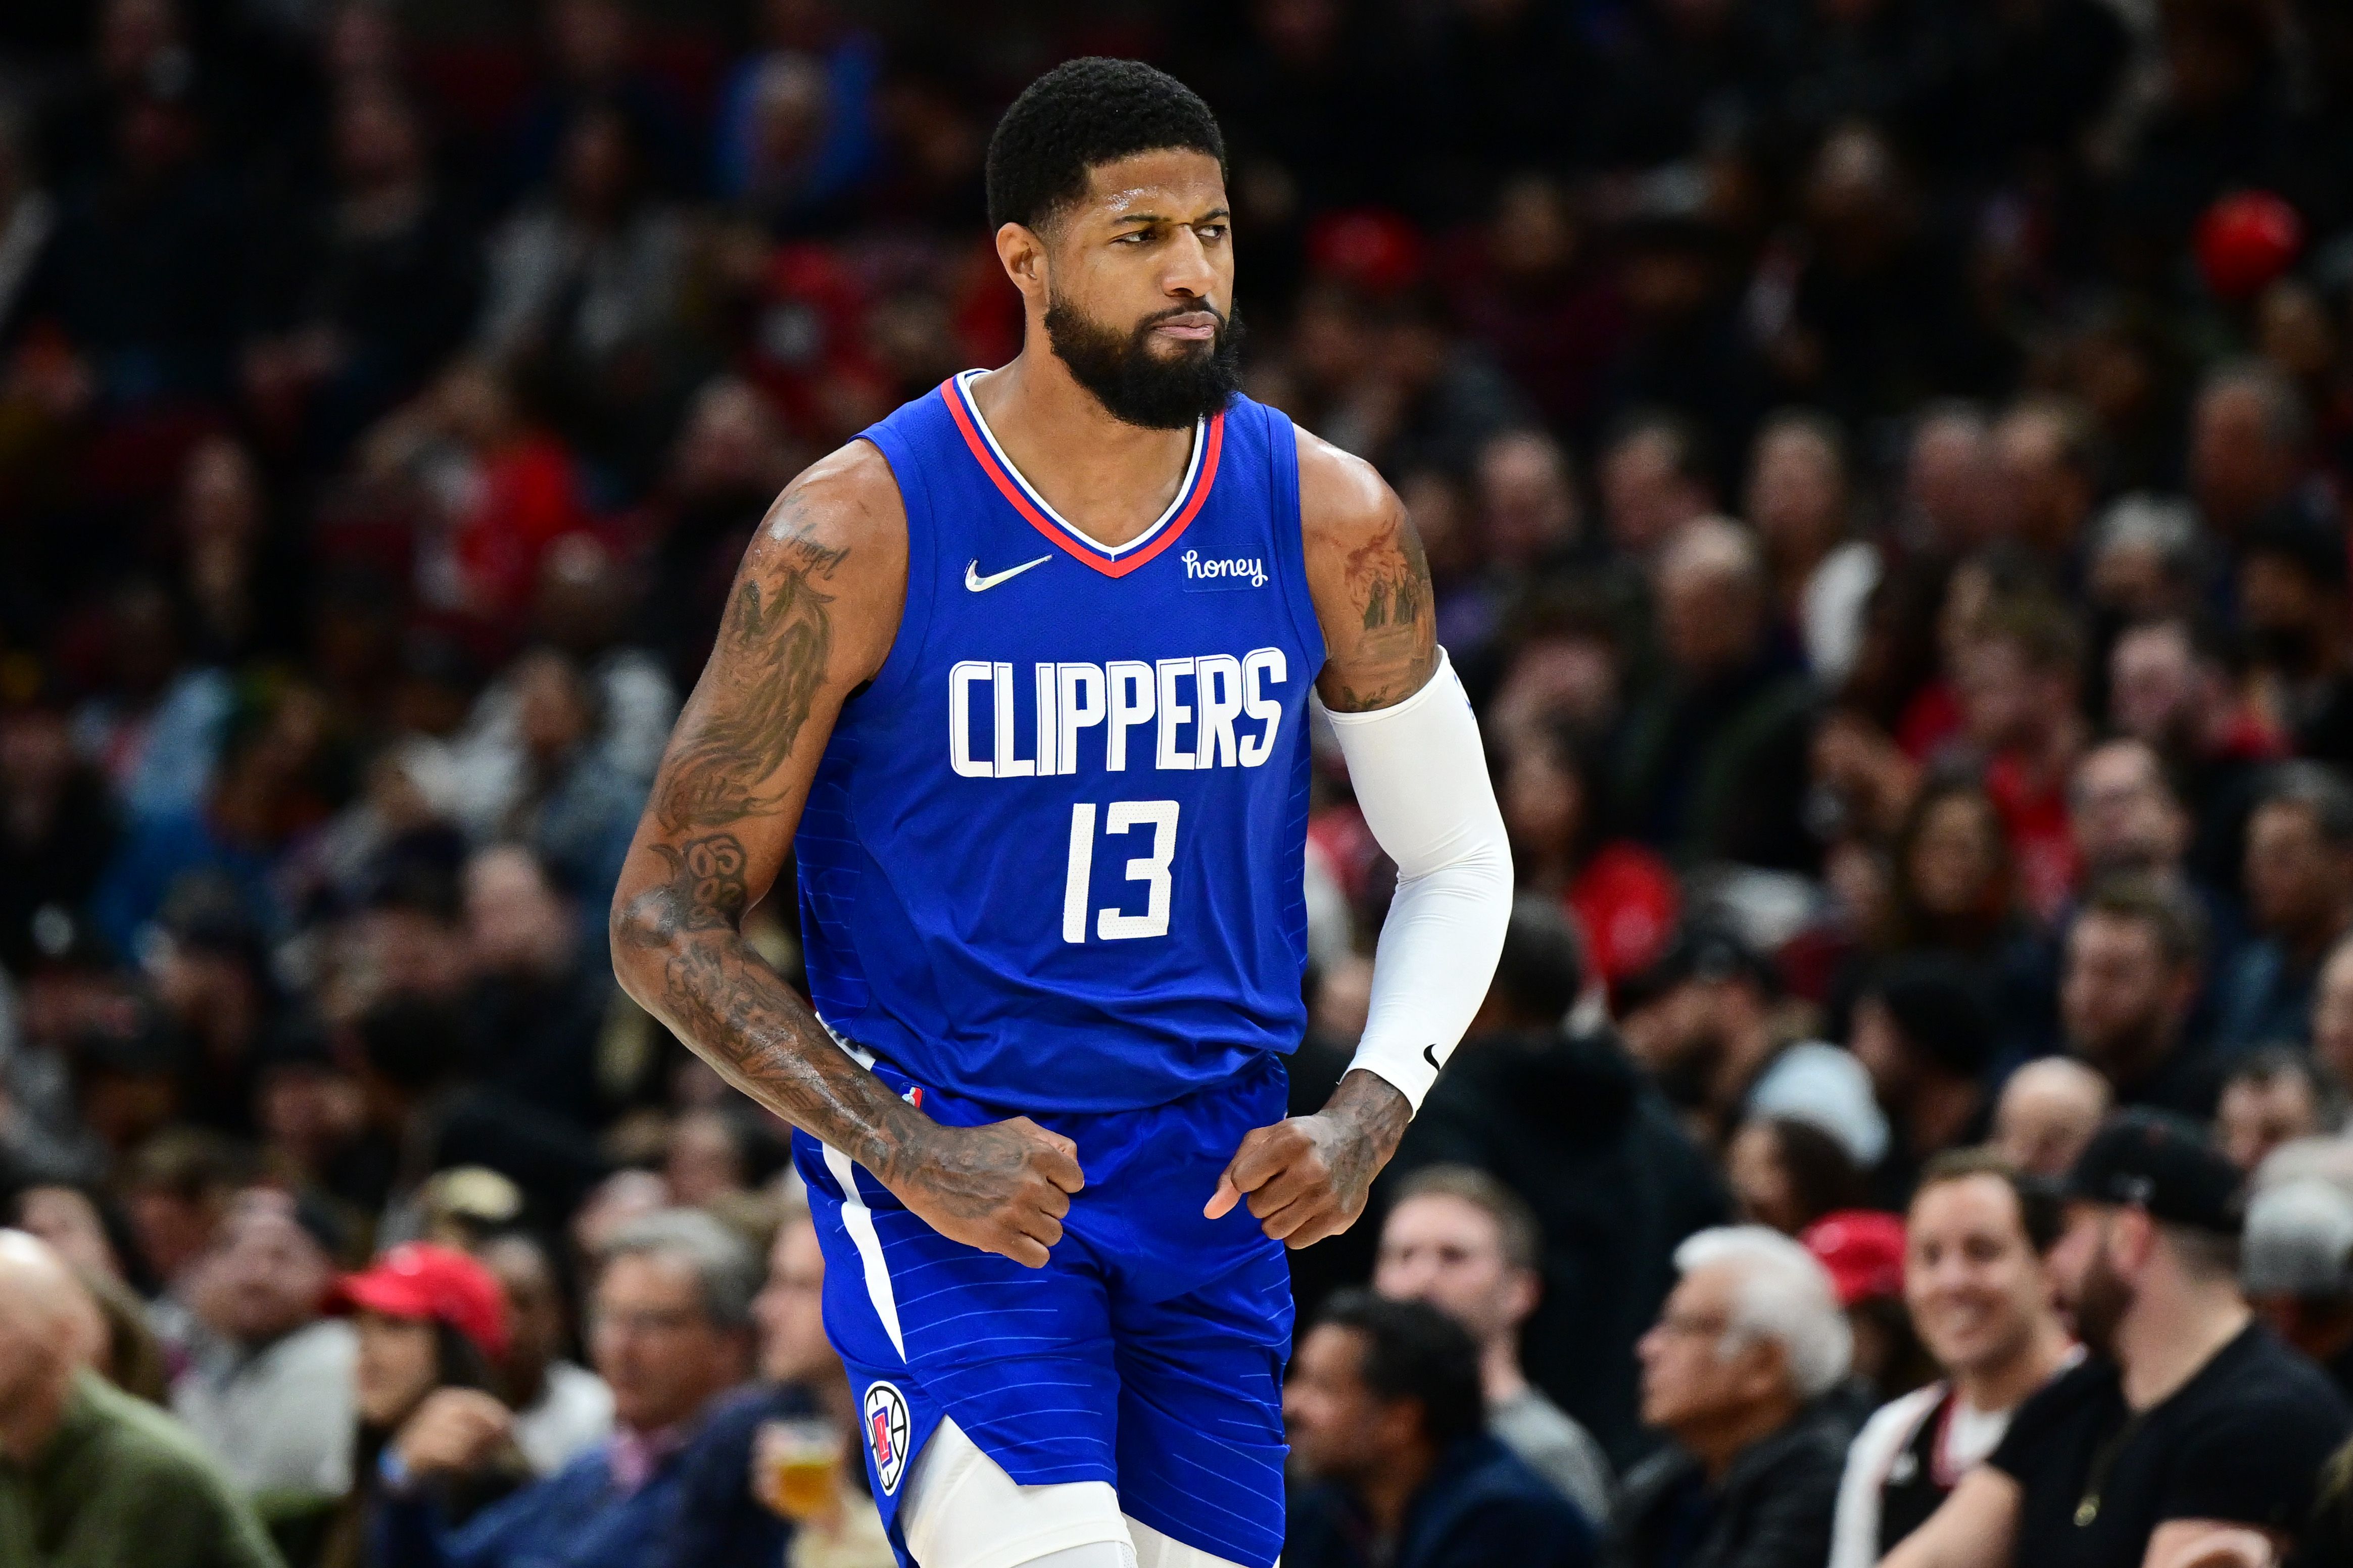 Paul George #13 of the Los Angeles Clippers reacts after making a three point basket in the first half against the Chicago Bulls at United Center on March 31, 2022